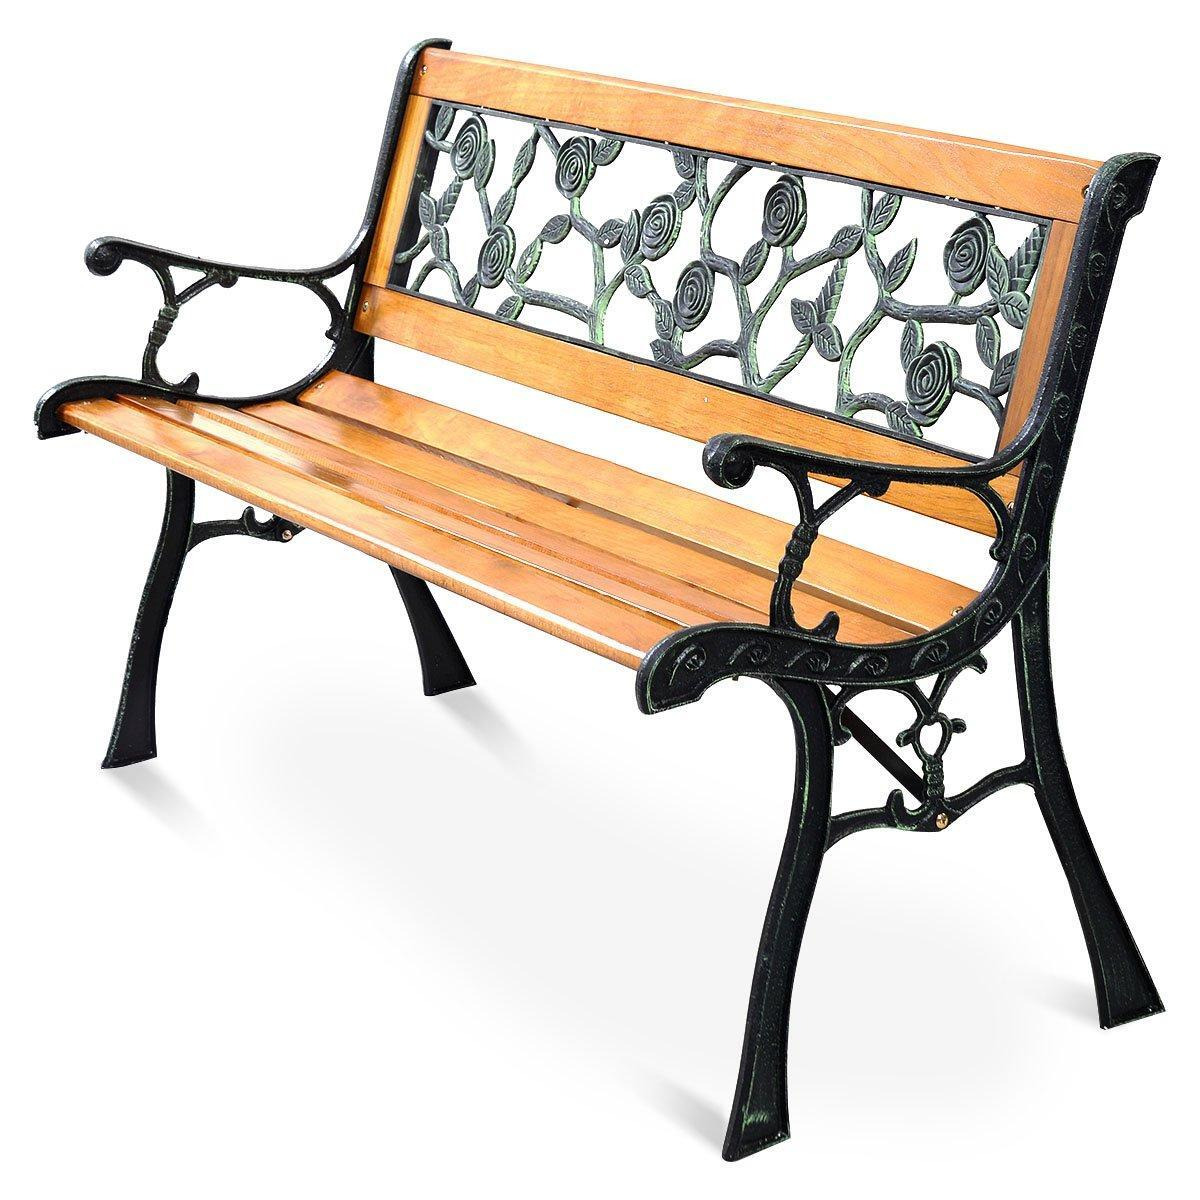 Garden Bench Furniture Weather-Proof Park Loveseat Chair Metal Structure - image 1